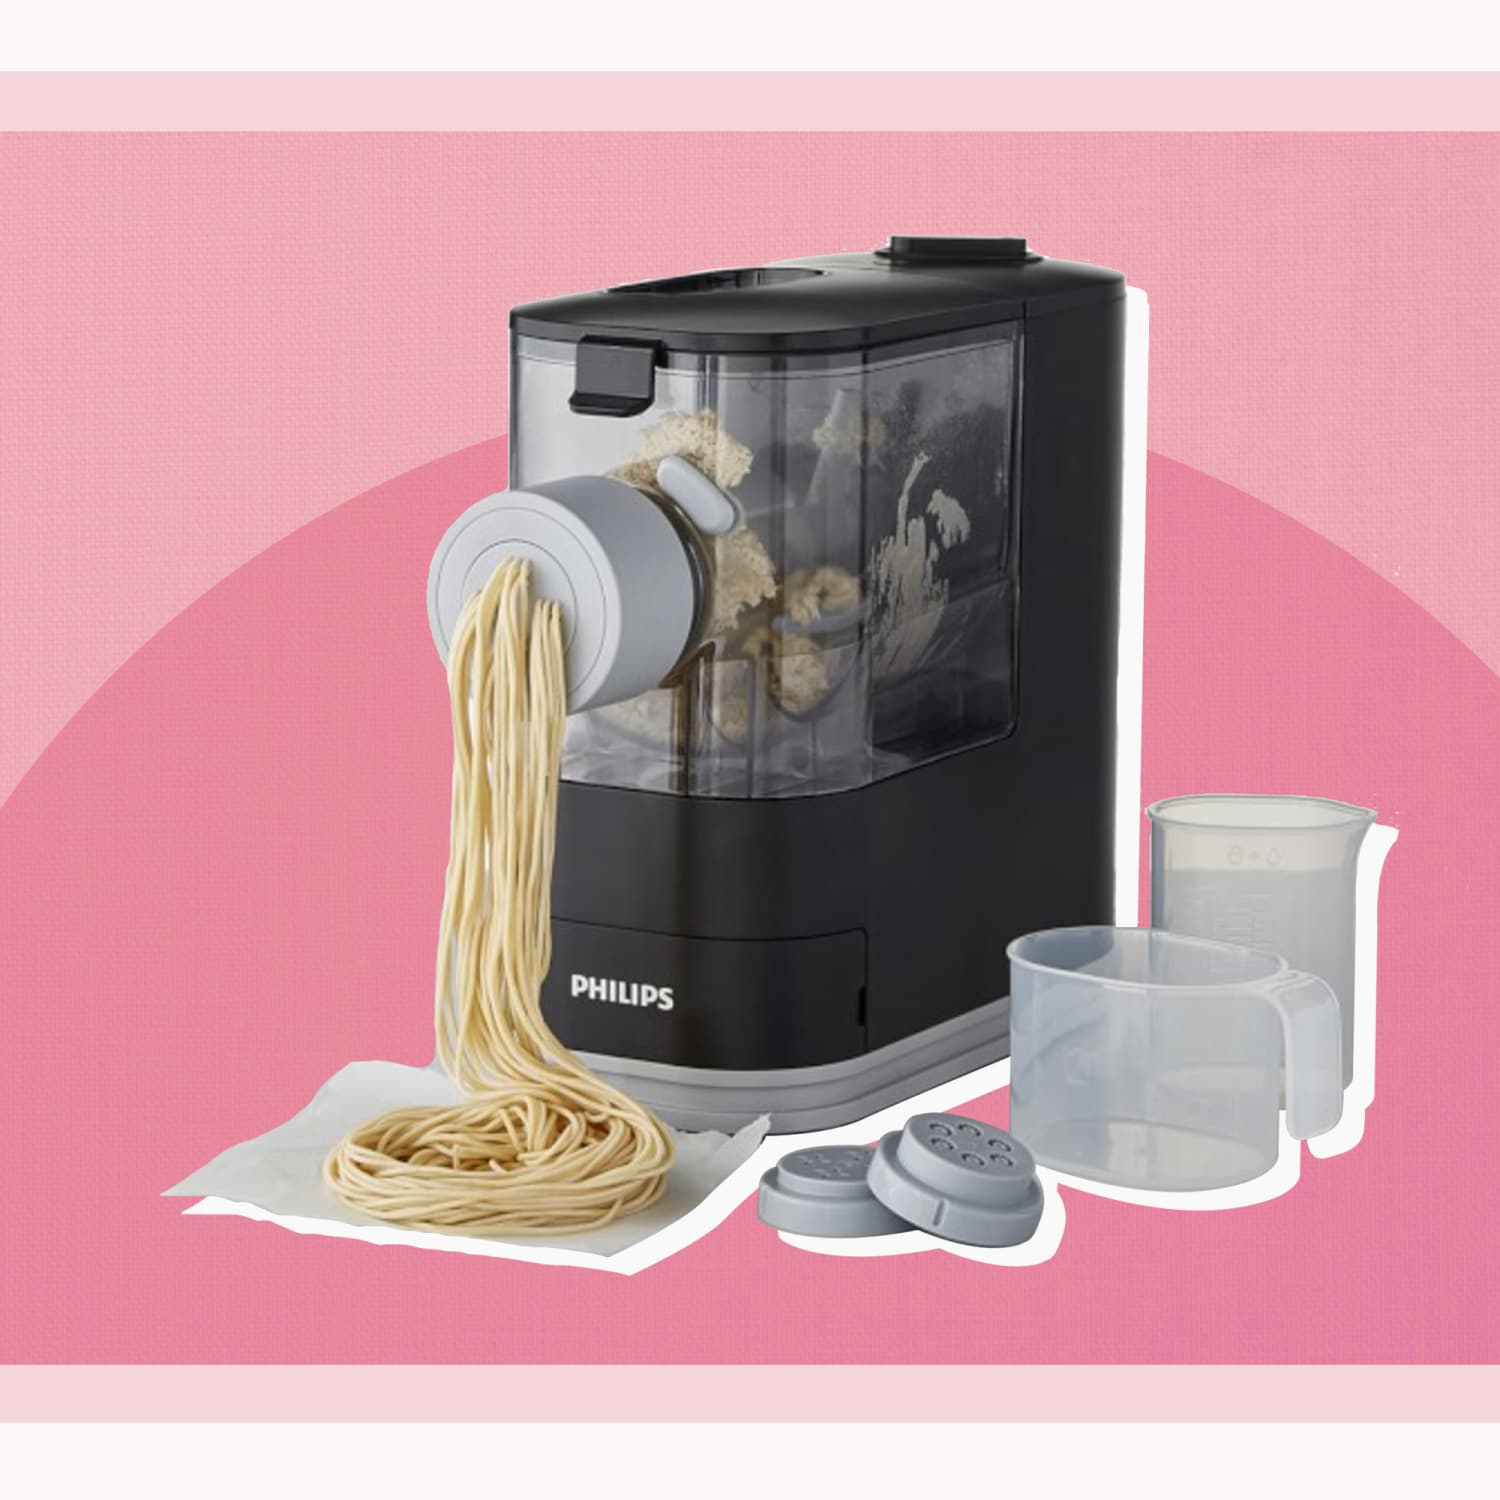 Philips Electric Pasta Maker on Sale for 40% Off at Williams